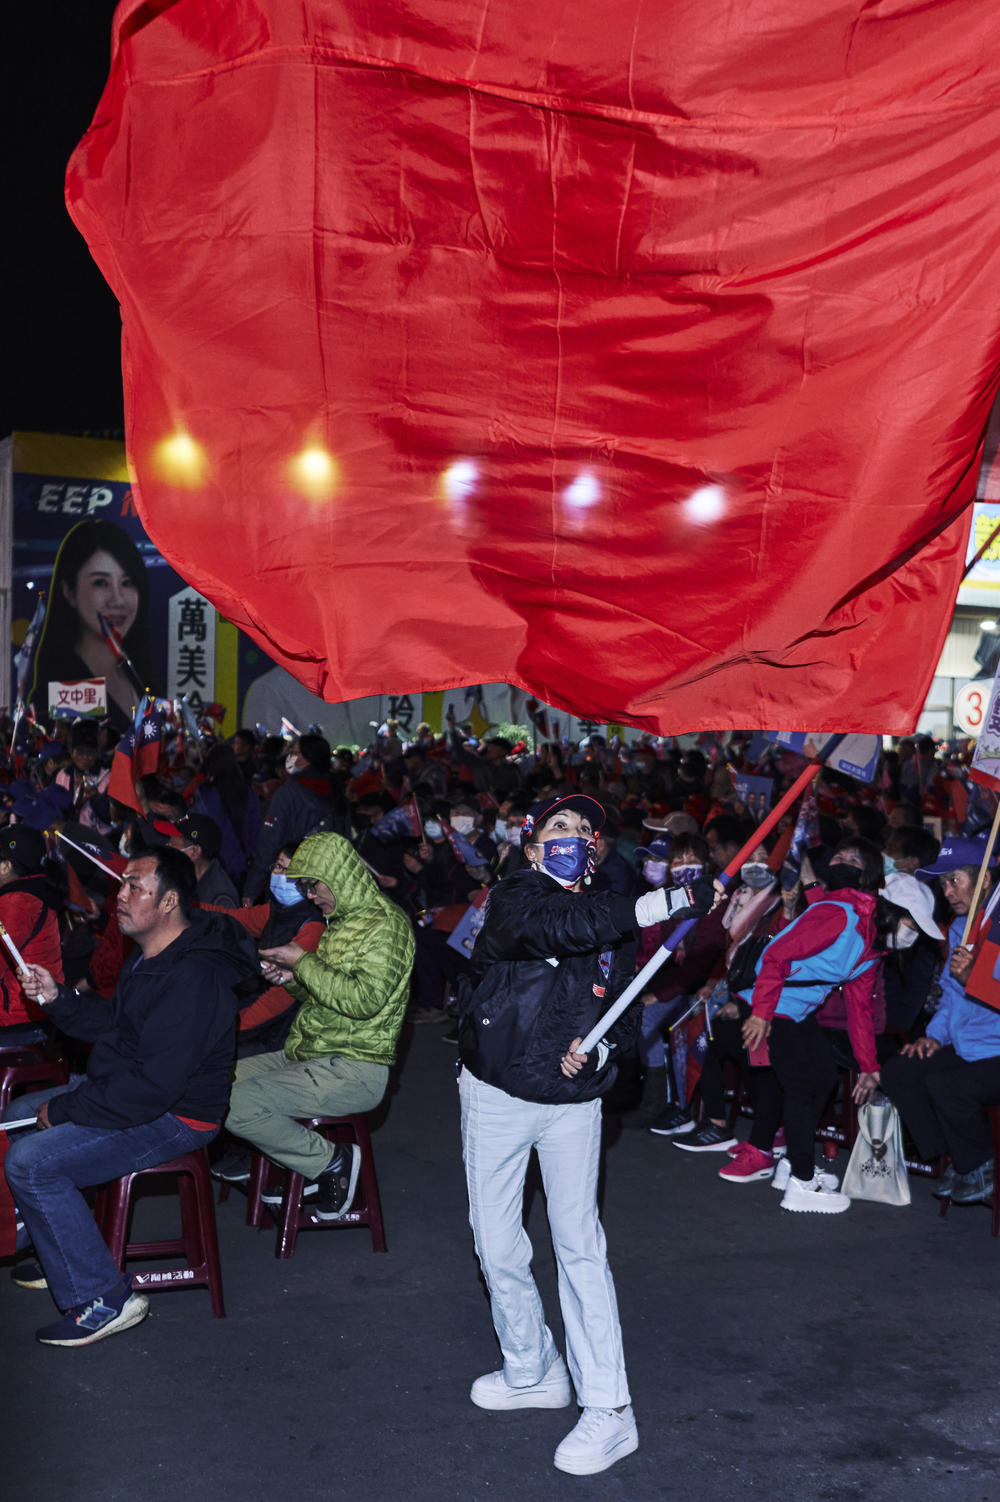 Big flags and big feelings are on display at a KMT rally.